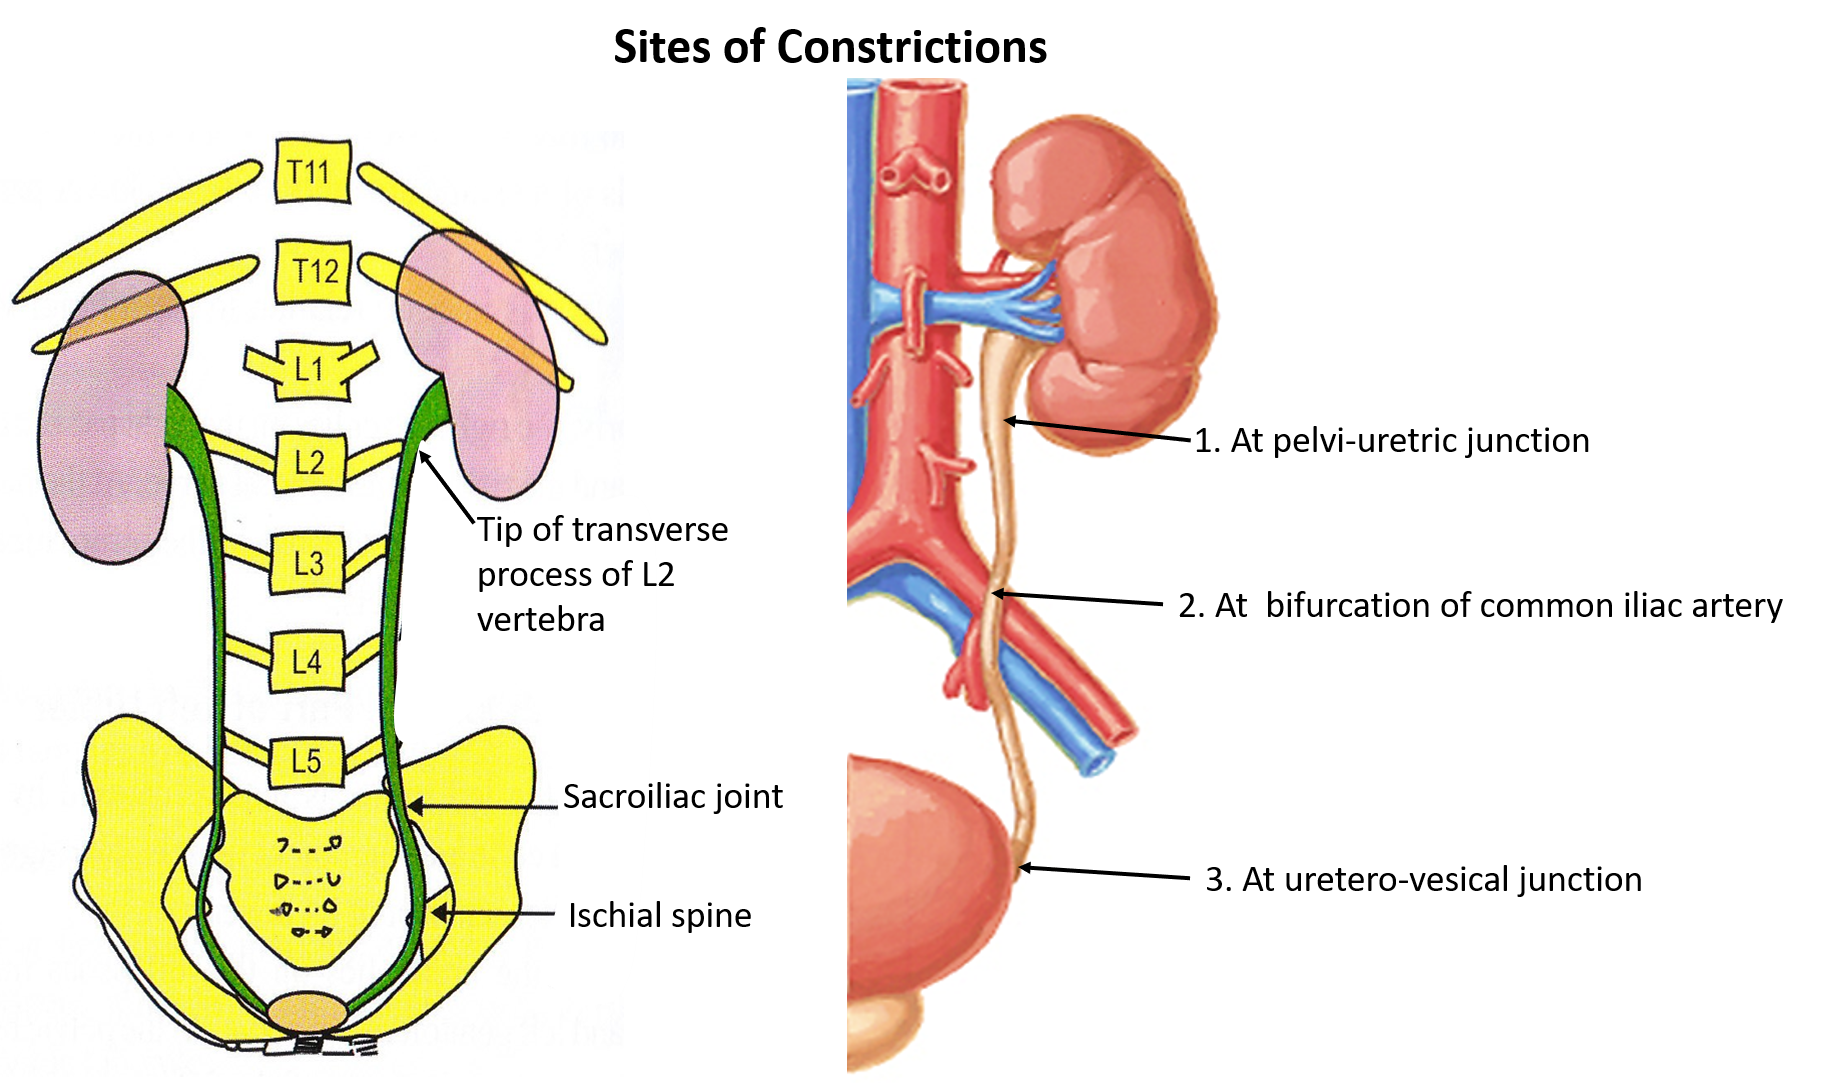 Ureter - sies of constriction